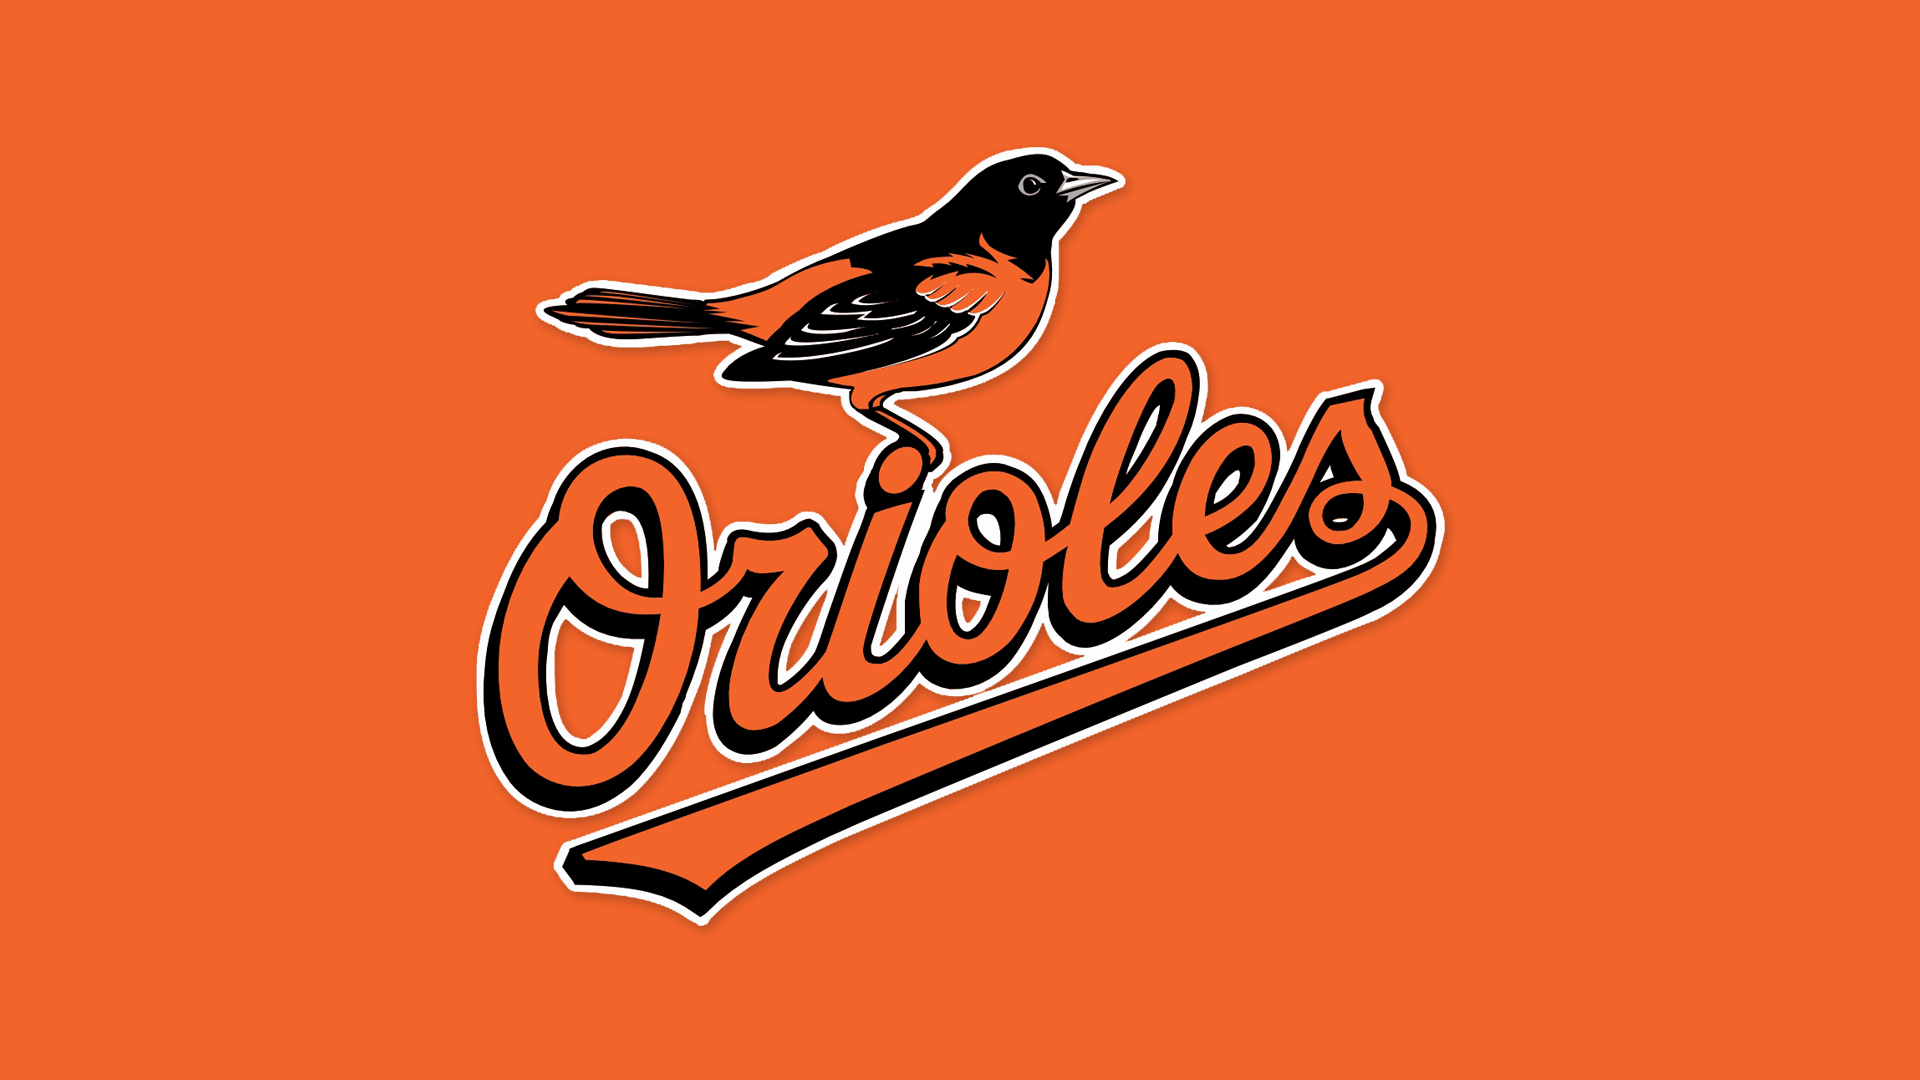 Baltimore Orioles Logo Best Cars Sports